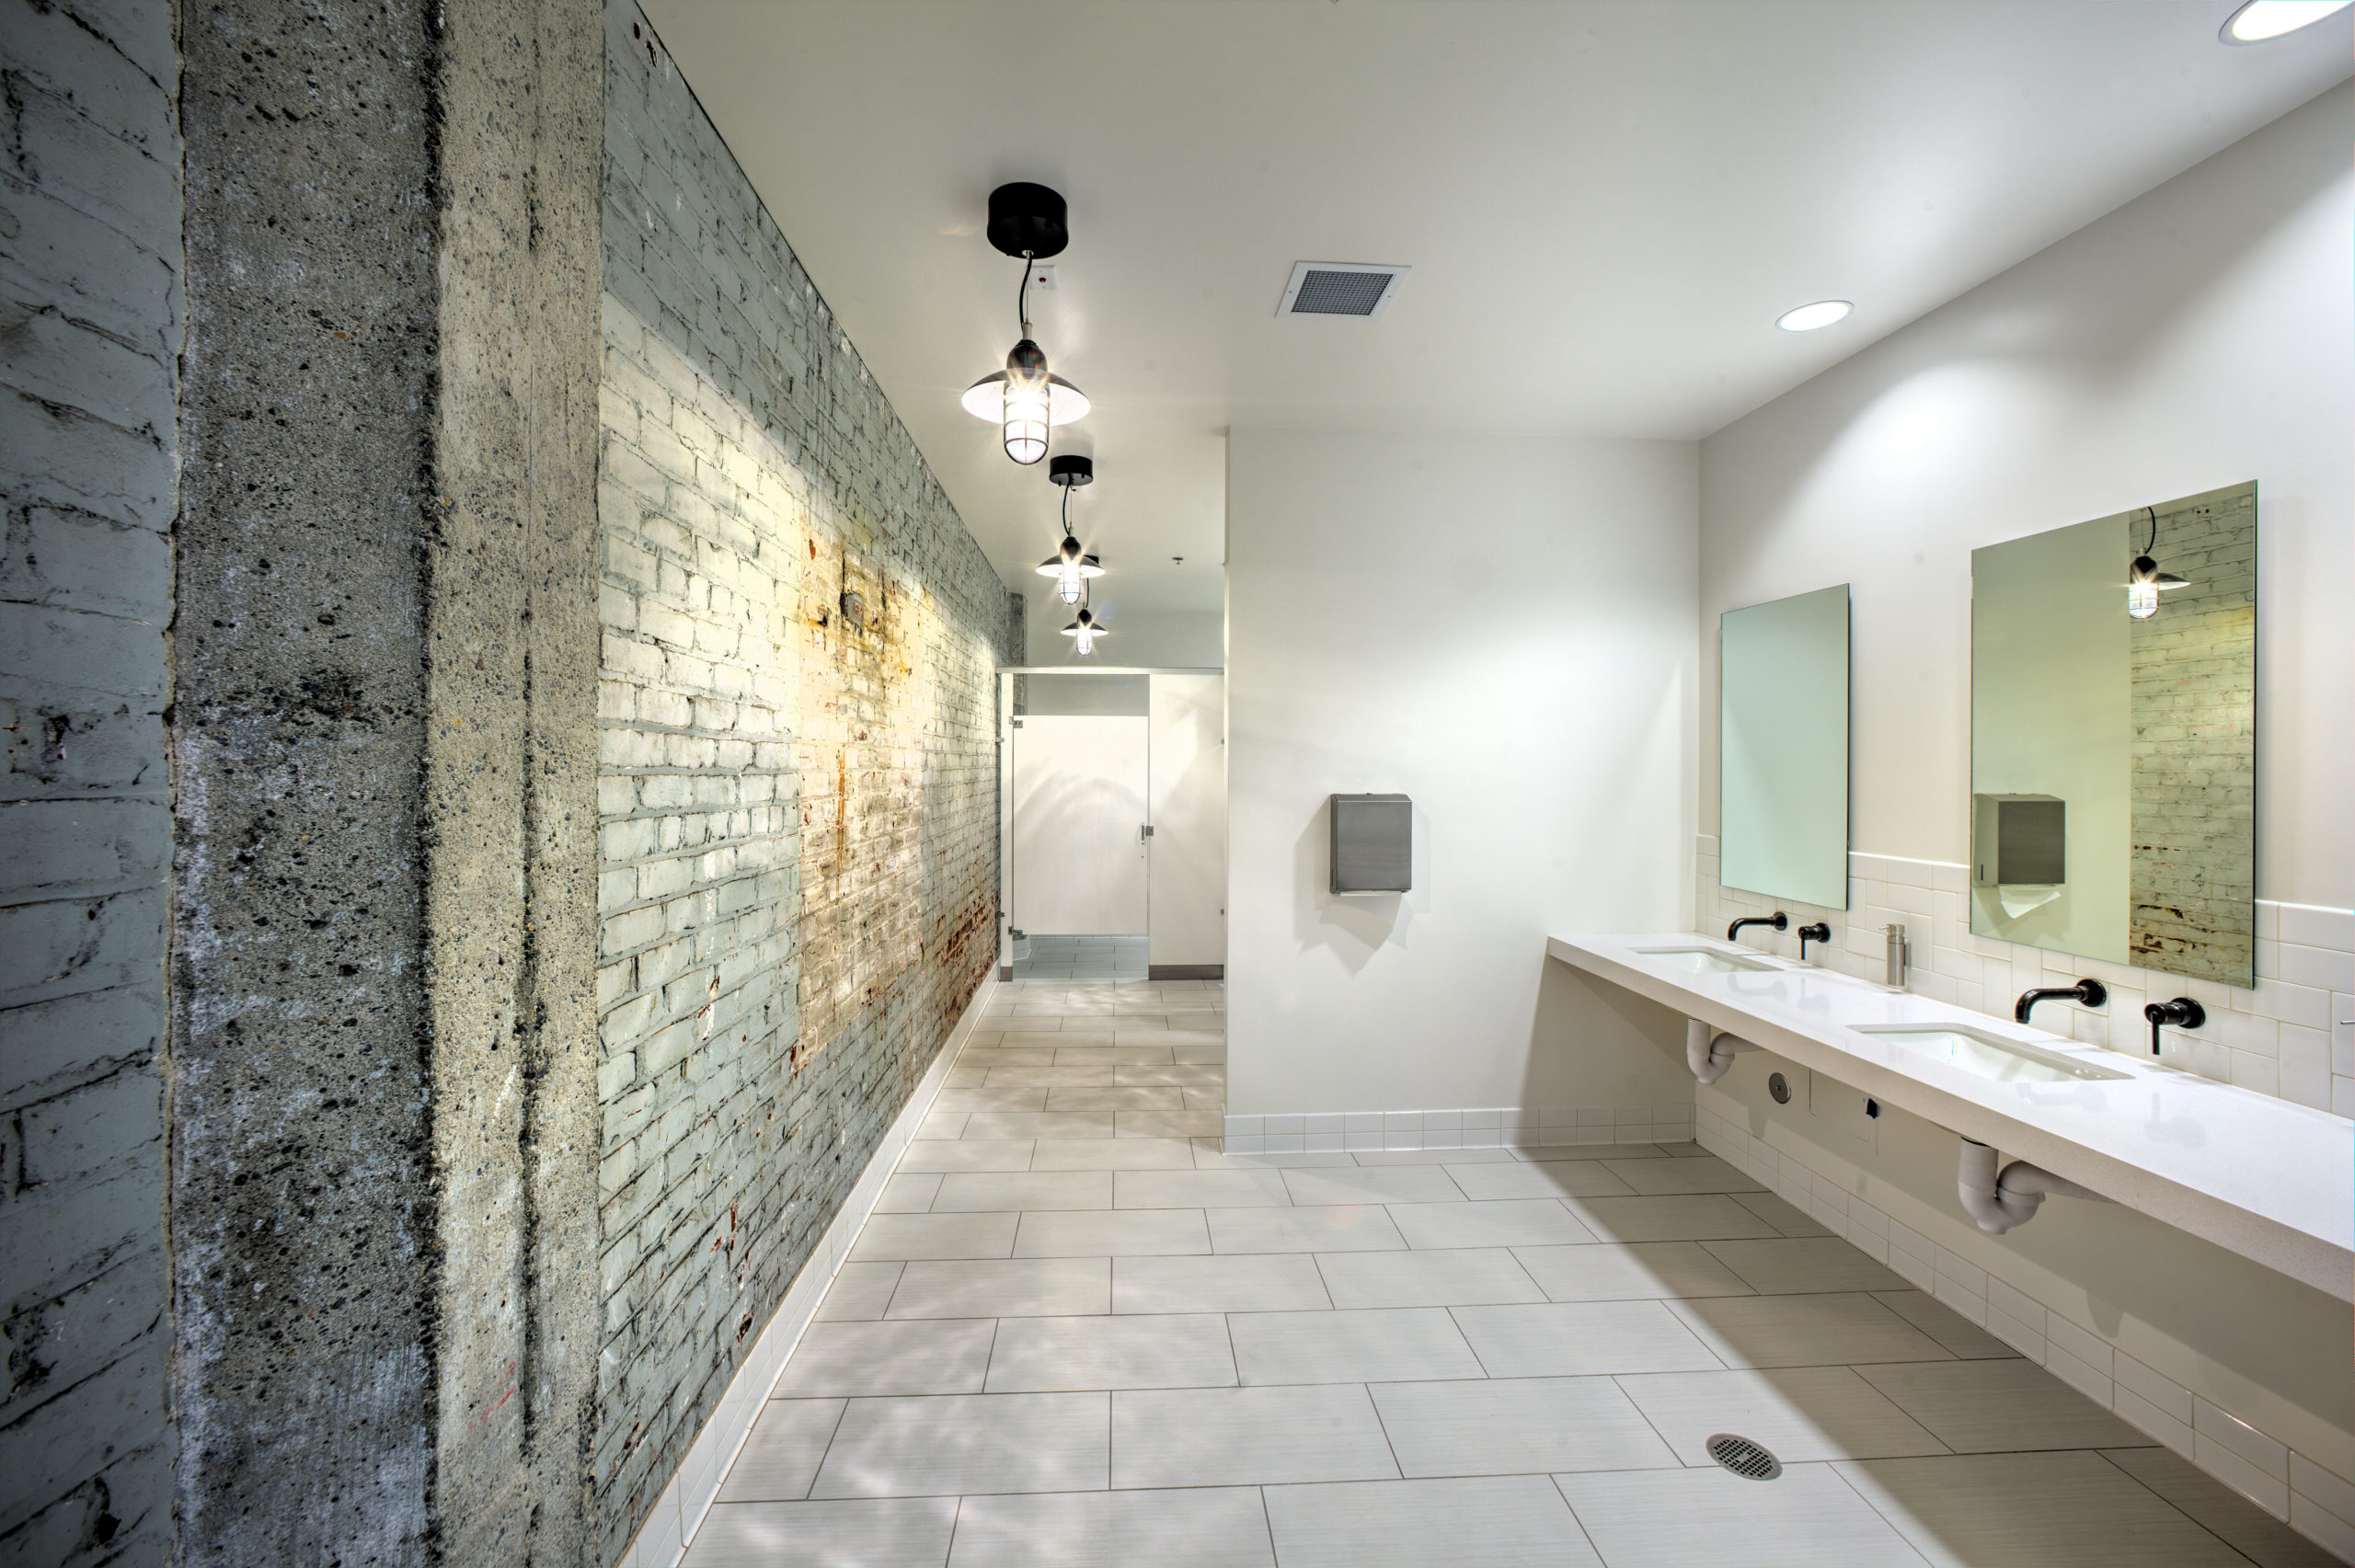 Interior of a bathroom constructed by Sunseri Associates